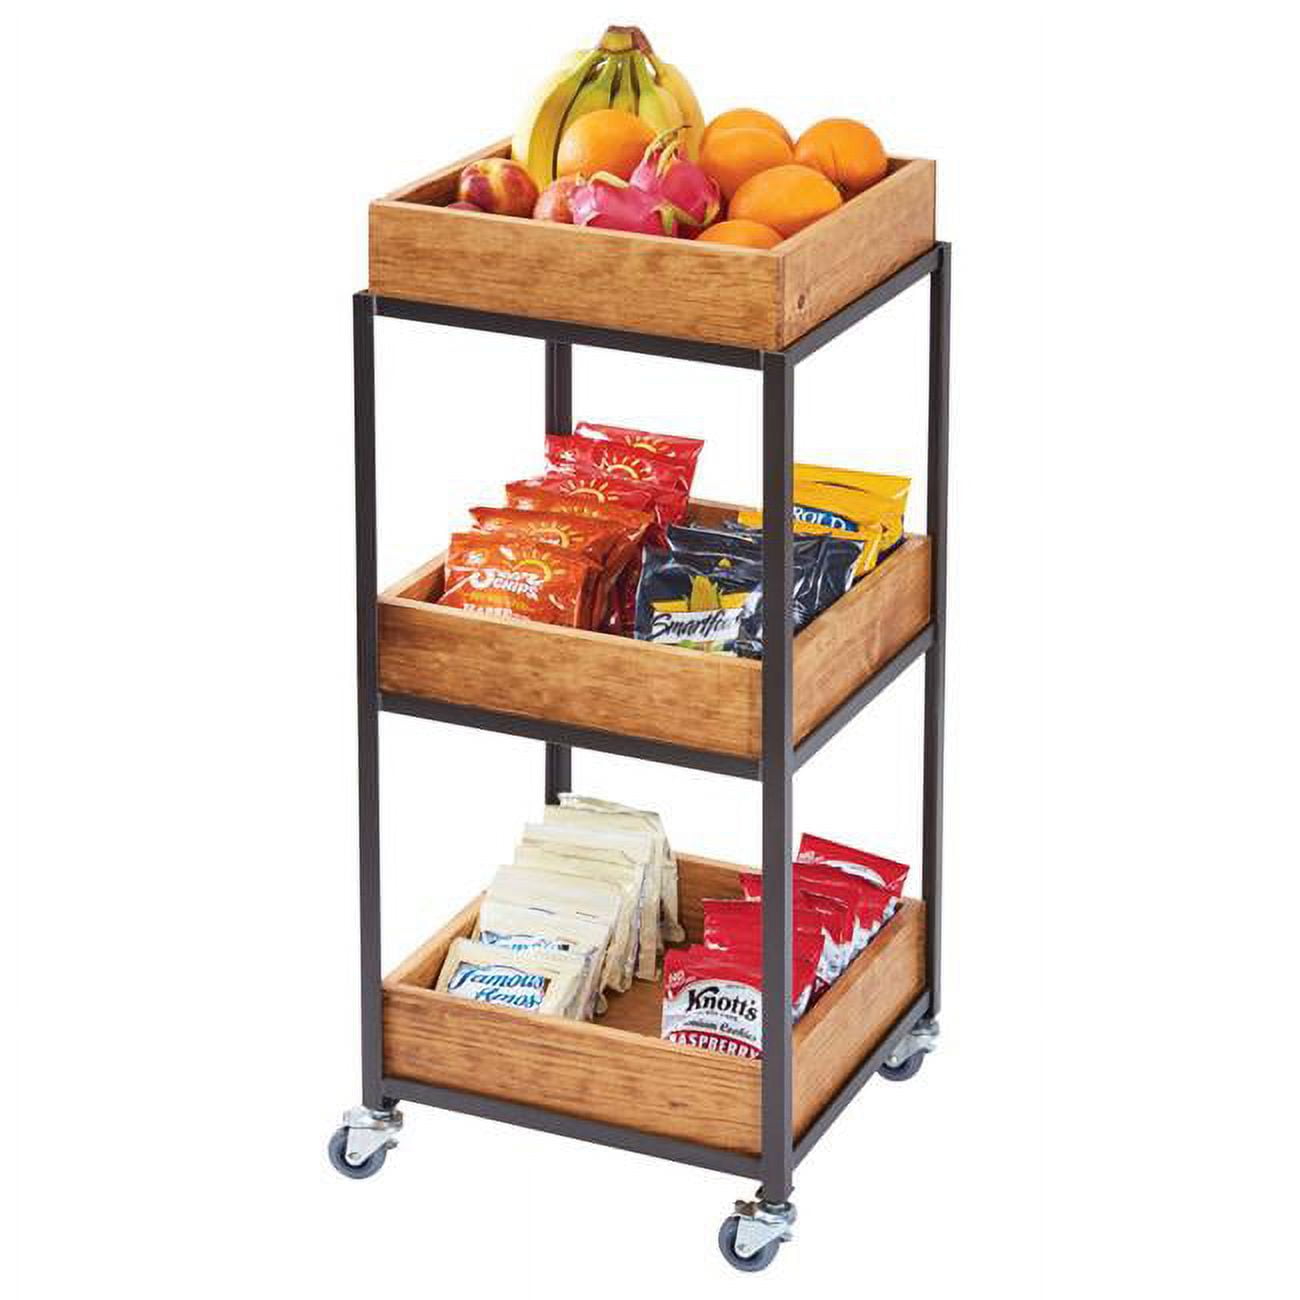 Picture of Cal Mil 3921-84 Sierra Bronze Metal & Reclaimed Wood 3-Tier Merchandiser Cart with Removable Bins - 14.75 x 14.75 x 35 in.